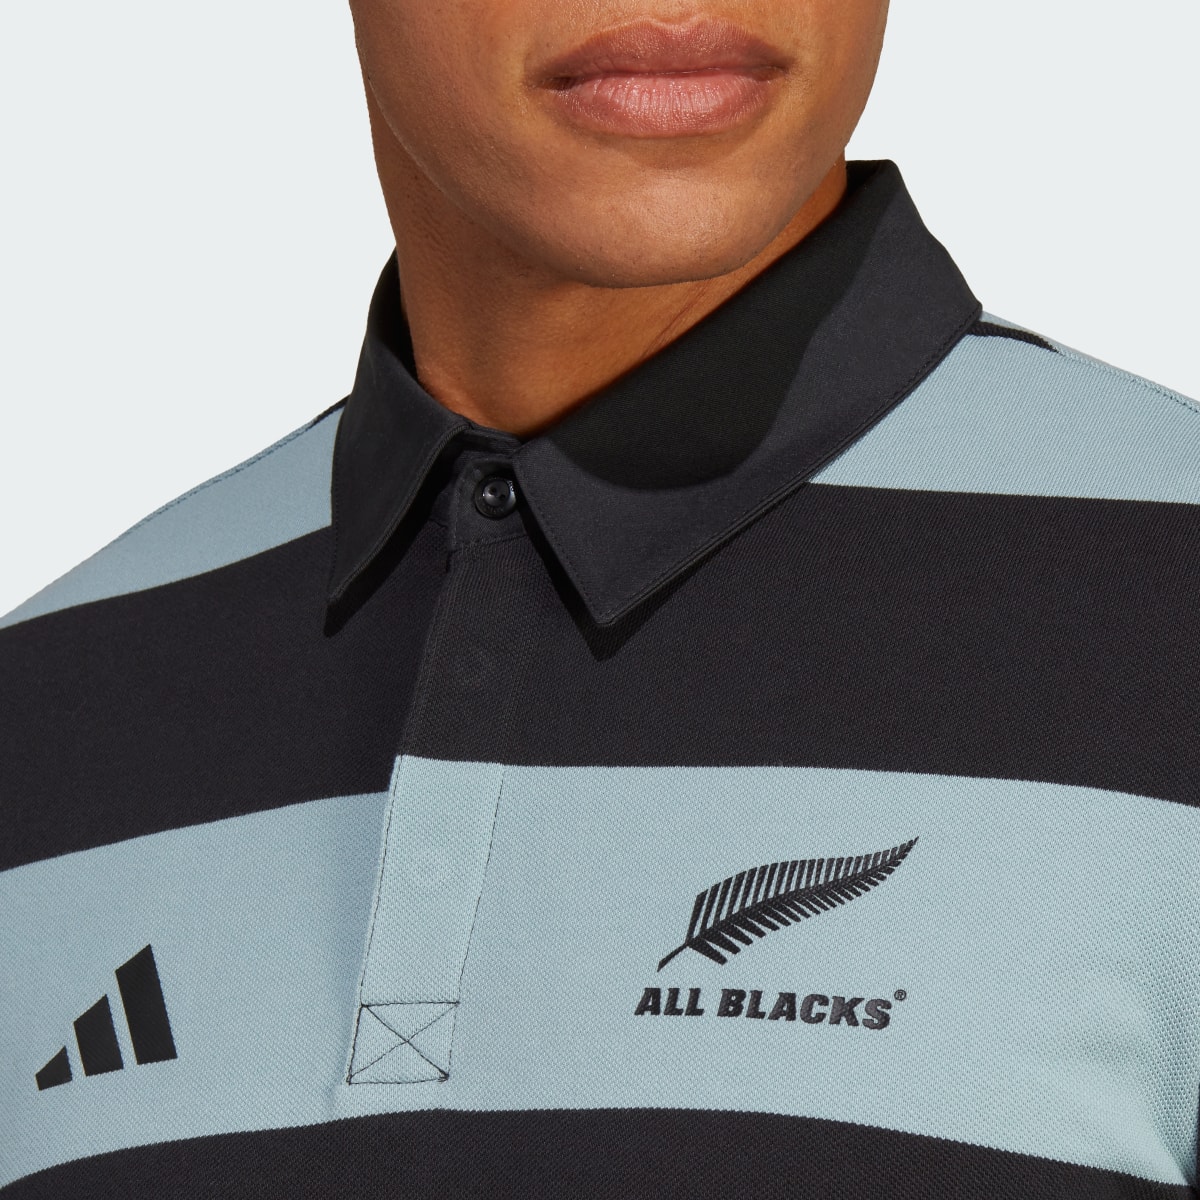 Adidas All Blacks Rugby Supporters Polo Shirt. 6